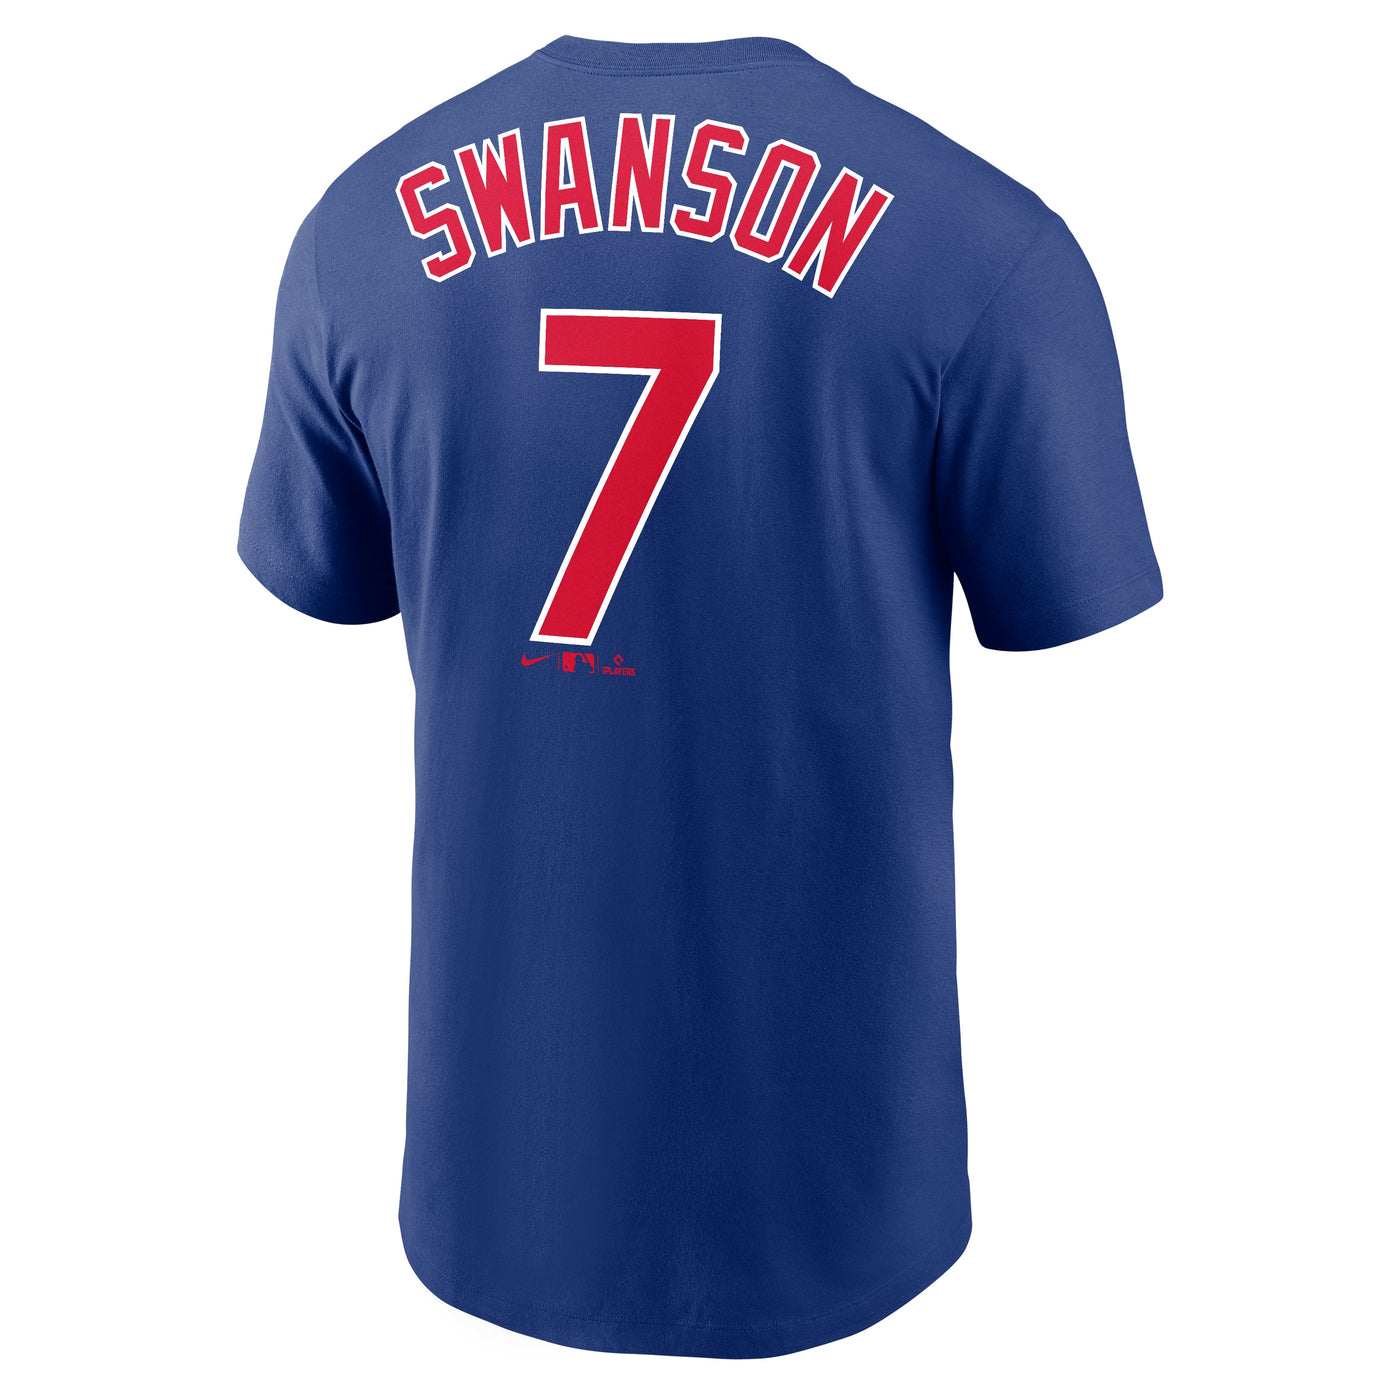 CHICAGO CUBS NIKE MEN'S DANSBY SWANSON NAME AND NUMBER TEE